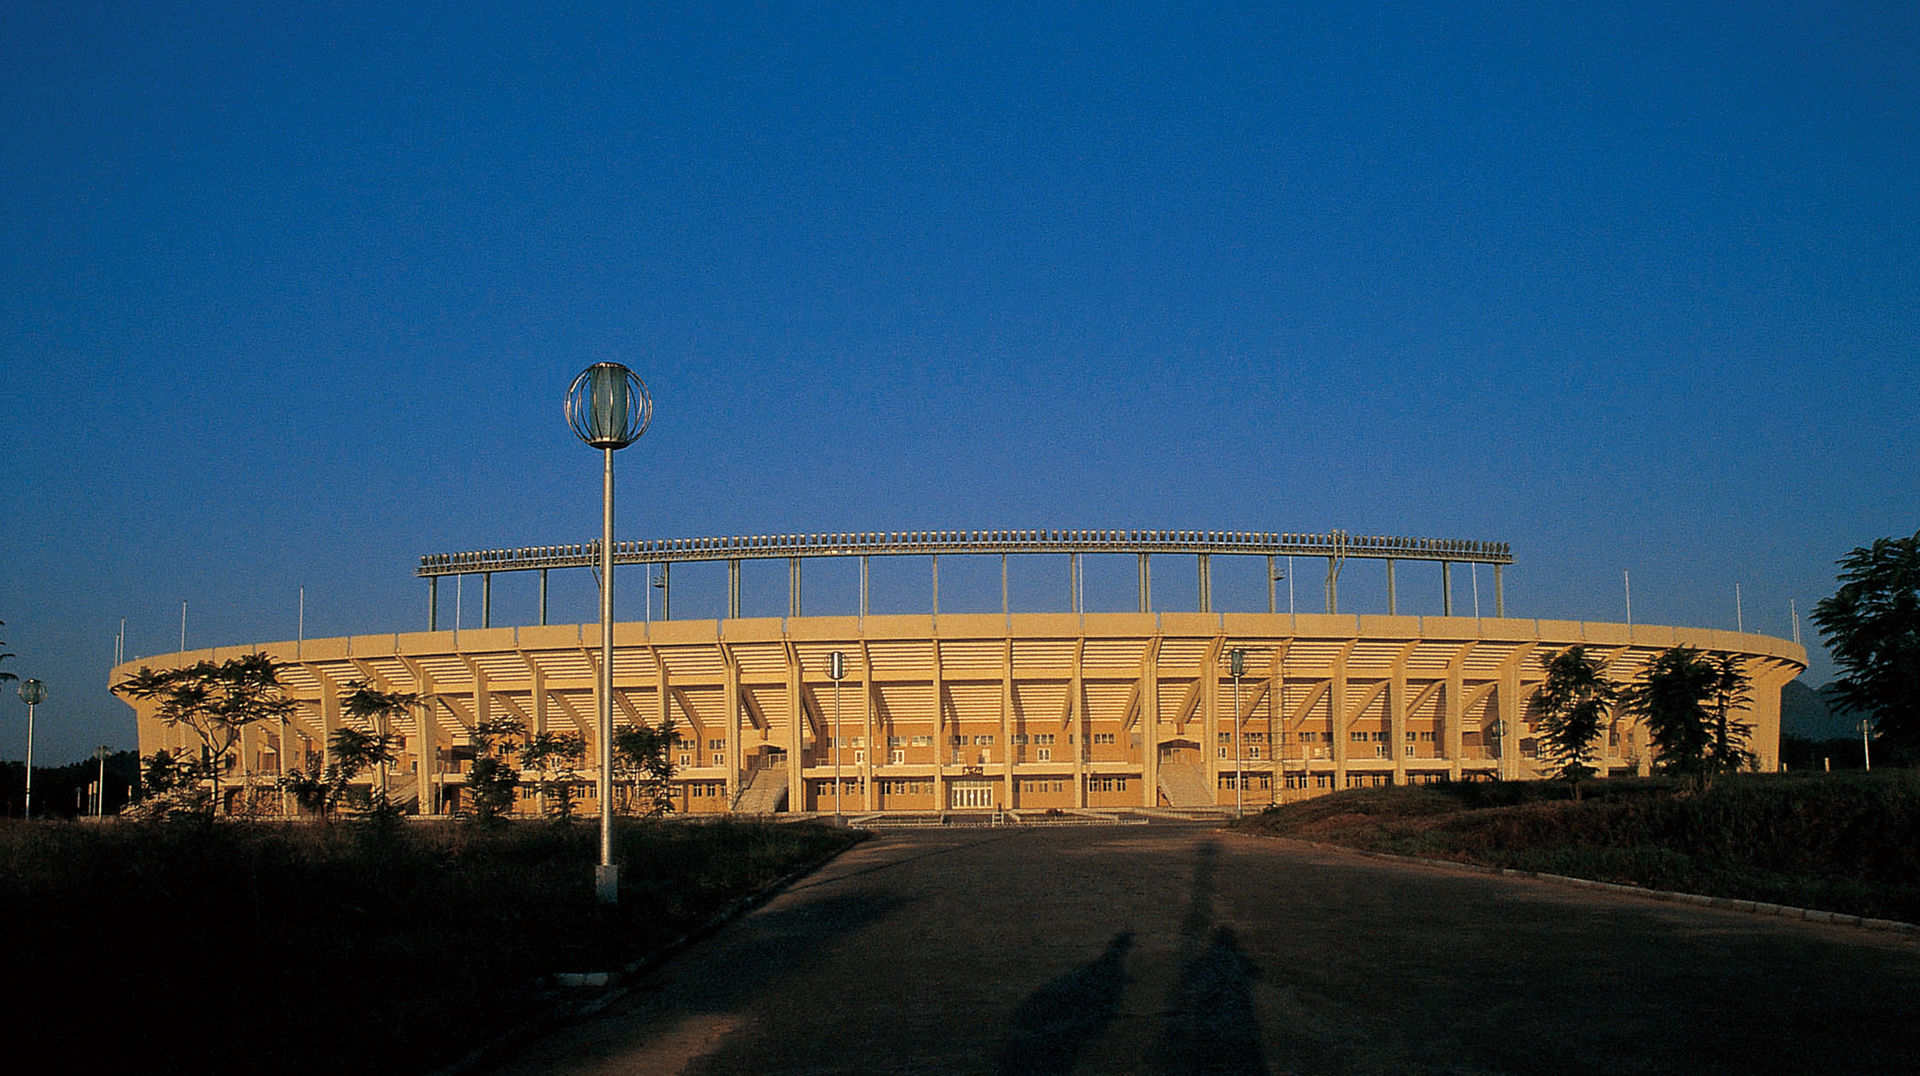 Islamabad Sports Complex, Pakistan  <br/>Best Design Award of the Ministry of Construction Second Prize